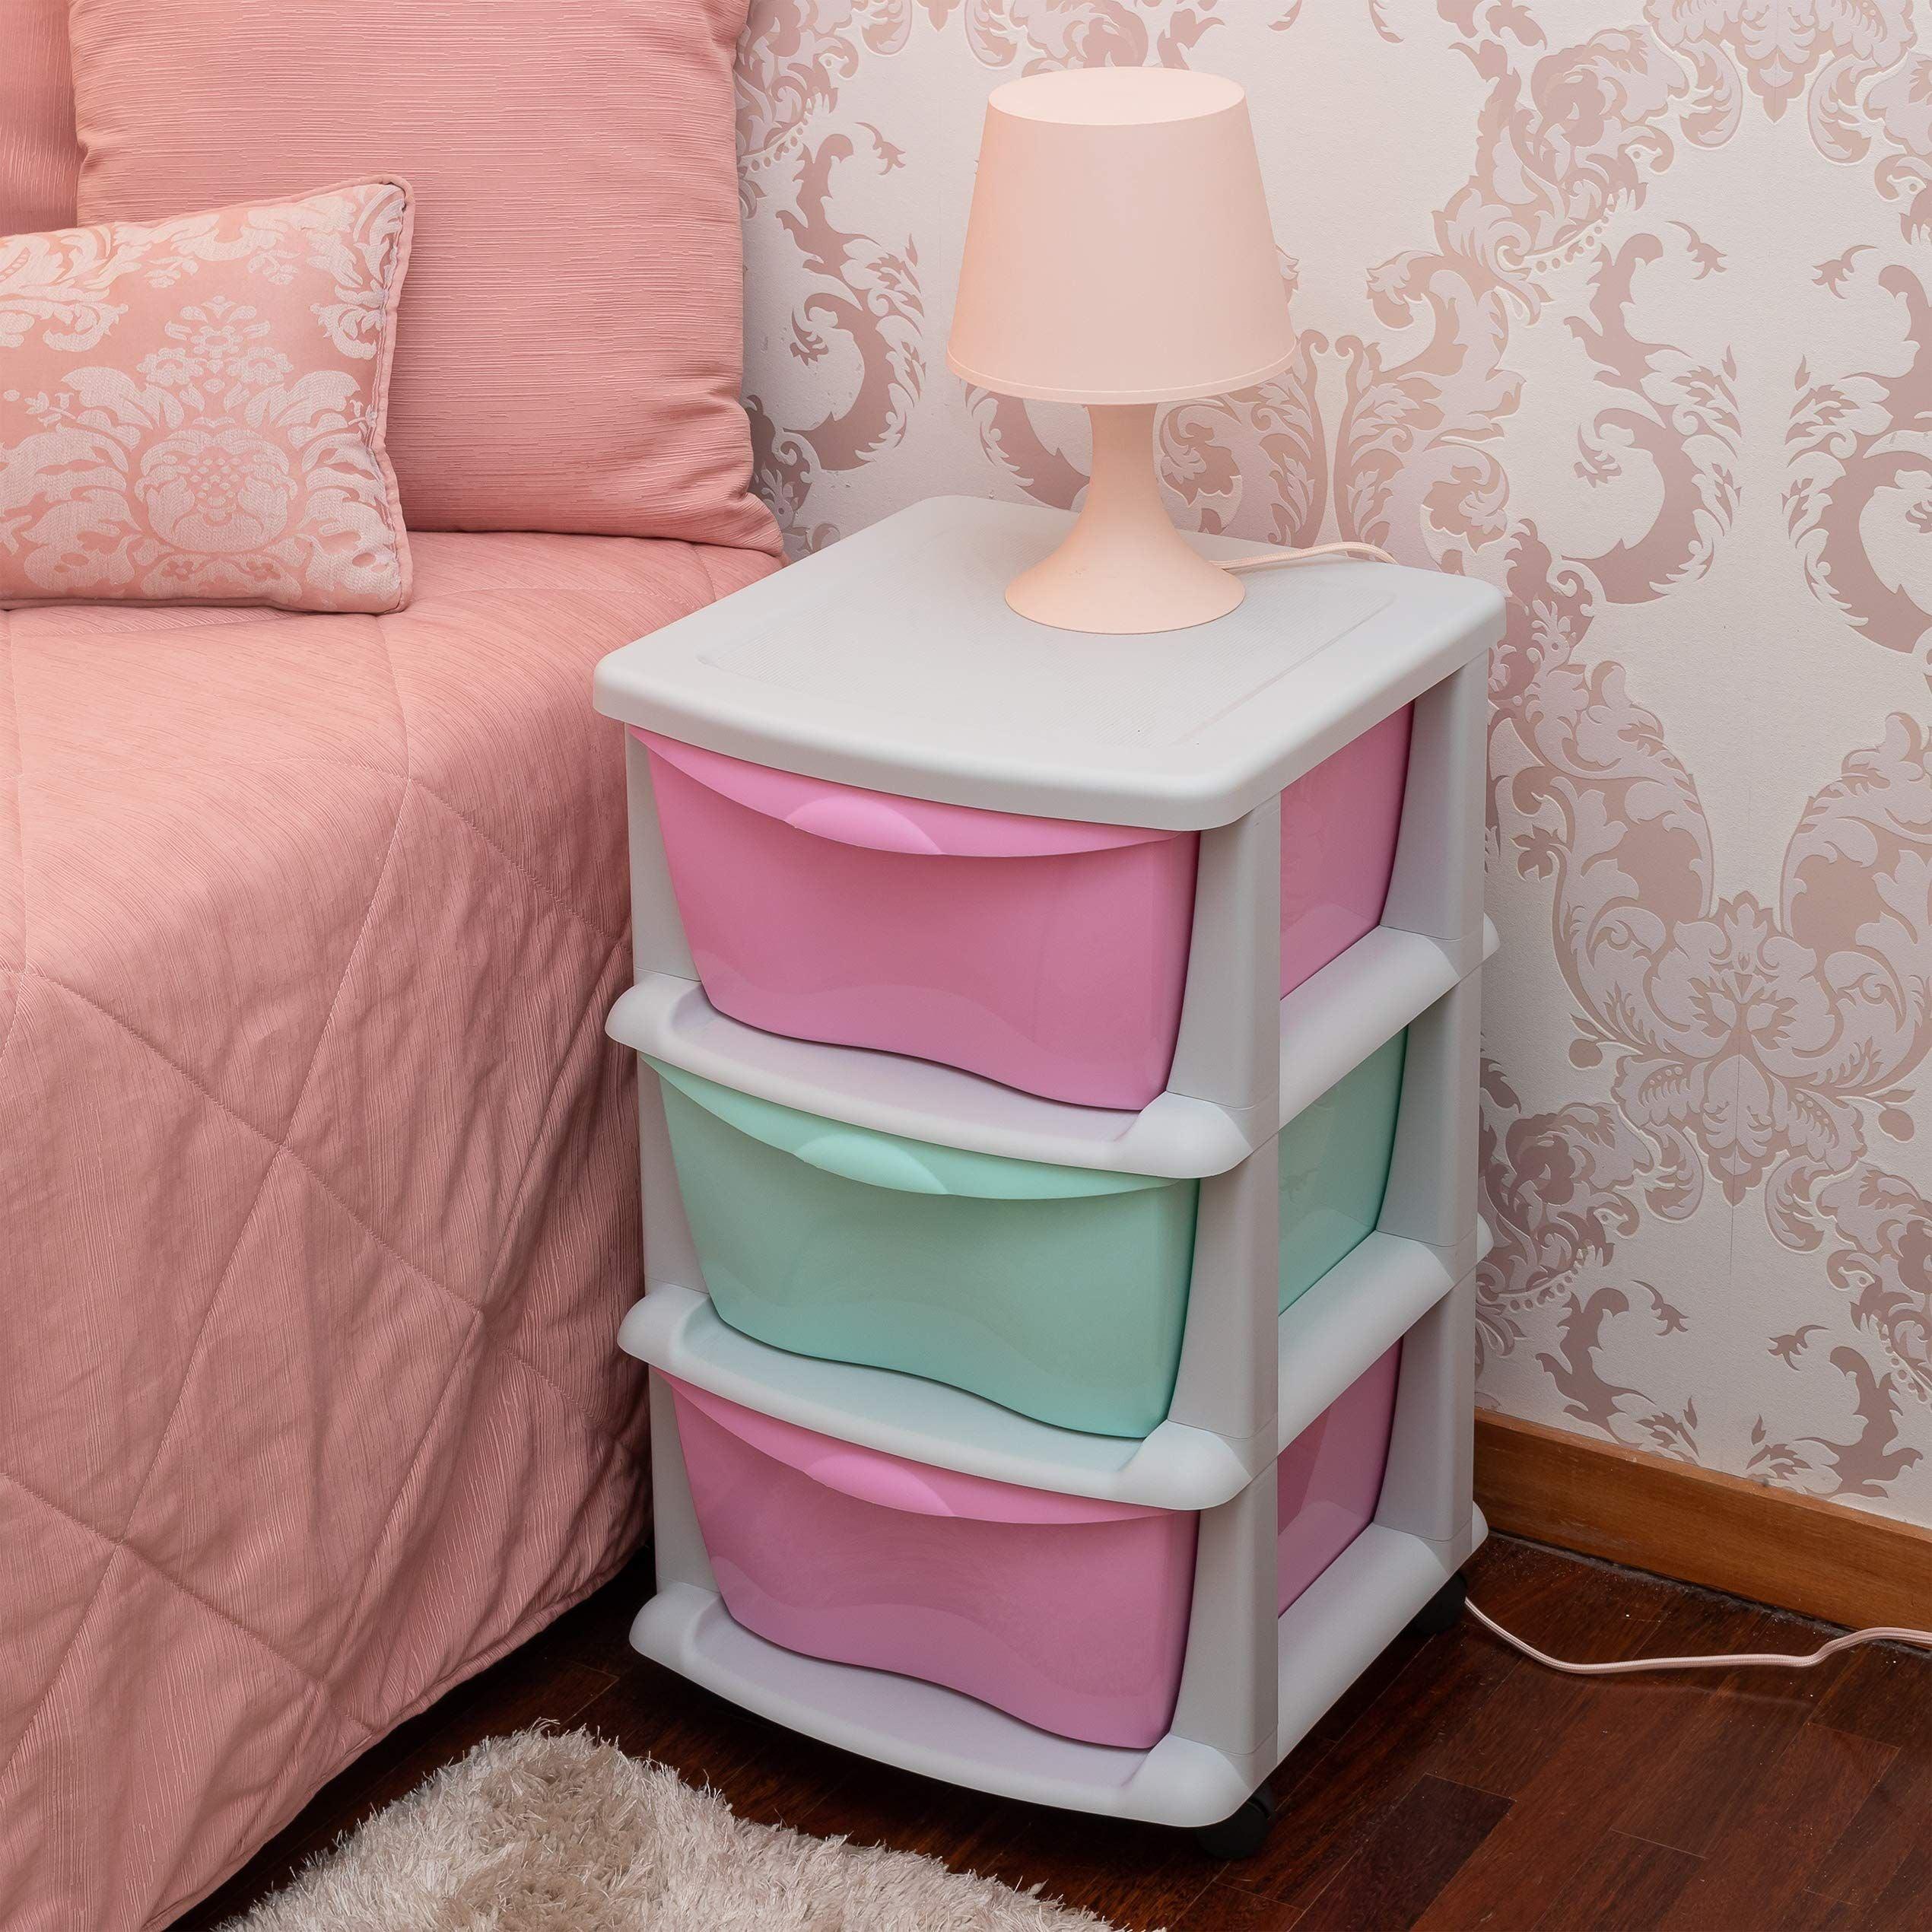 Maxi Nature Plastic Storage Drawers on Wheels - Sturdy Frame, Durable, Heavy Duty Organiser - 3 Tier Large Storage Unit for Kids Bedroom, Bathroom, Office - Made in Europe - Pink/Blue 1